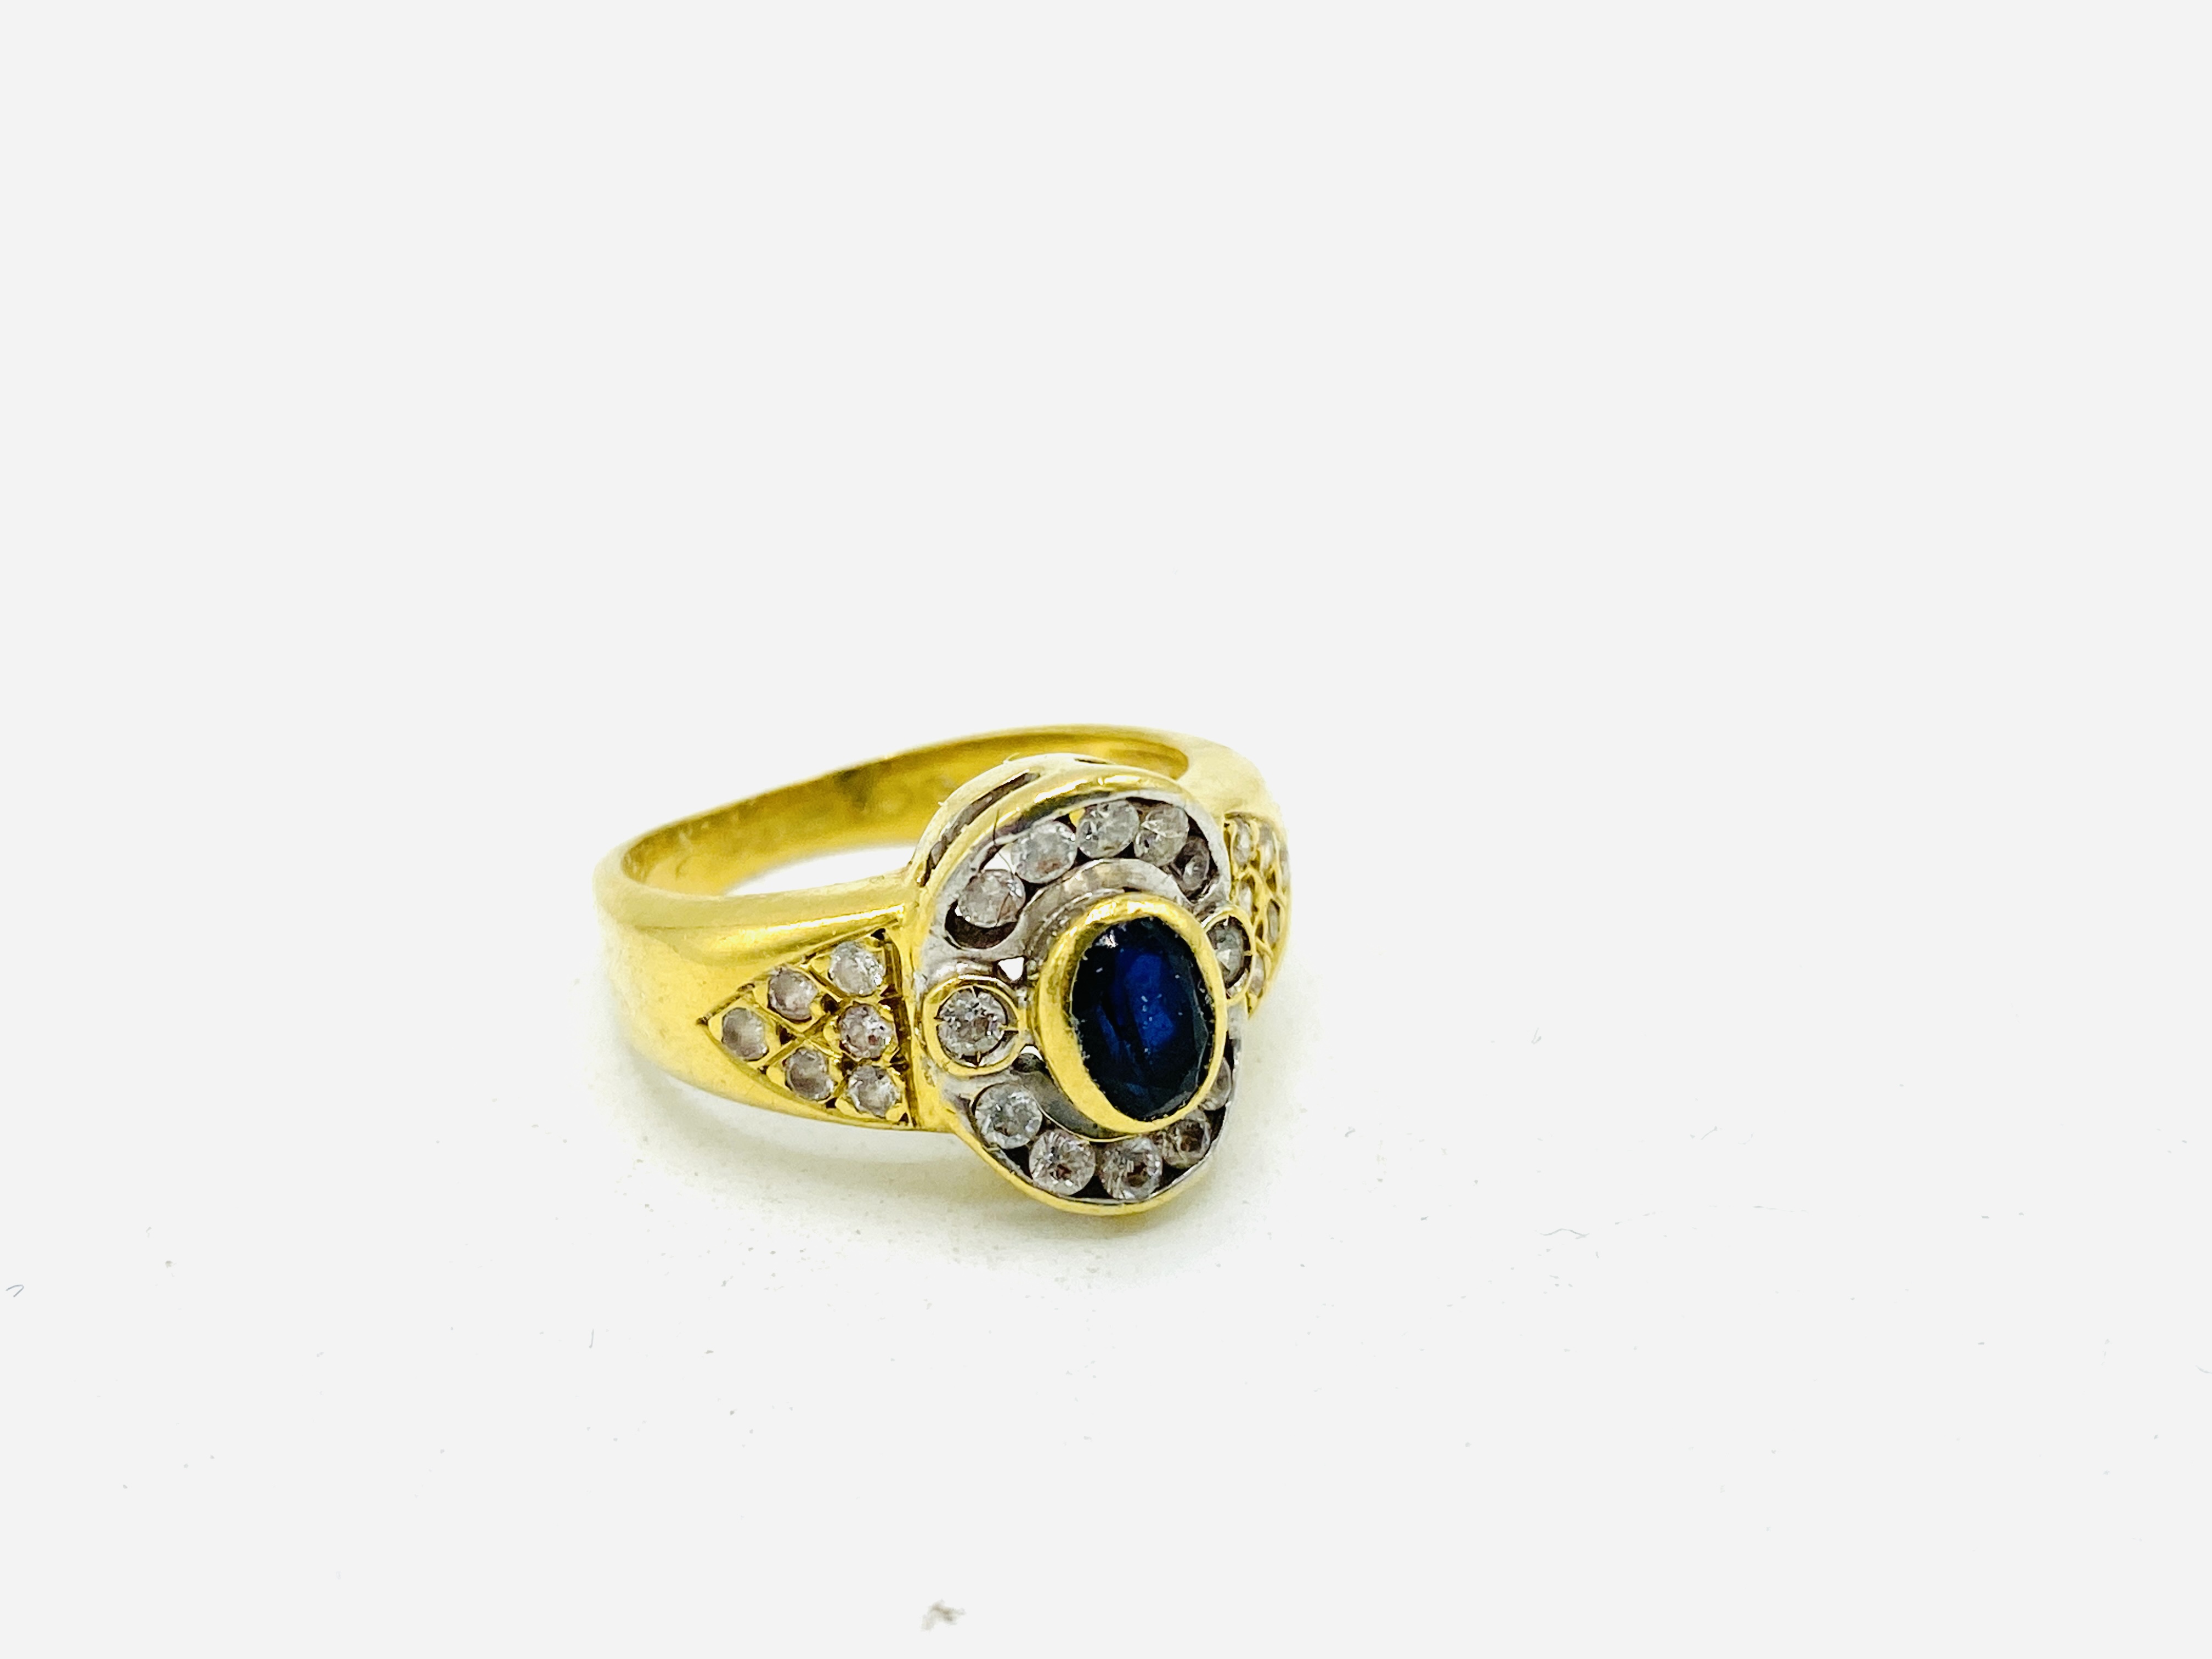 18ct gold, diamond and sapphire ring